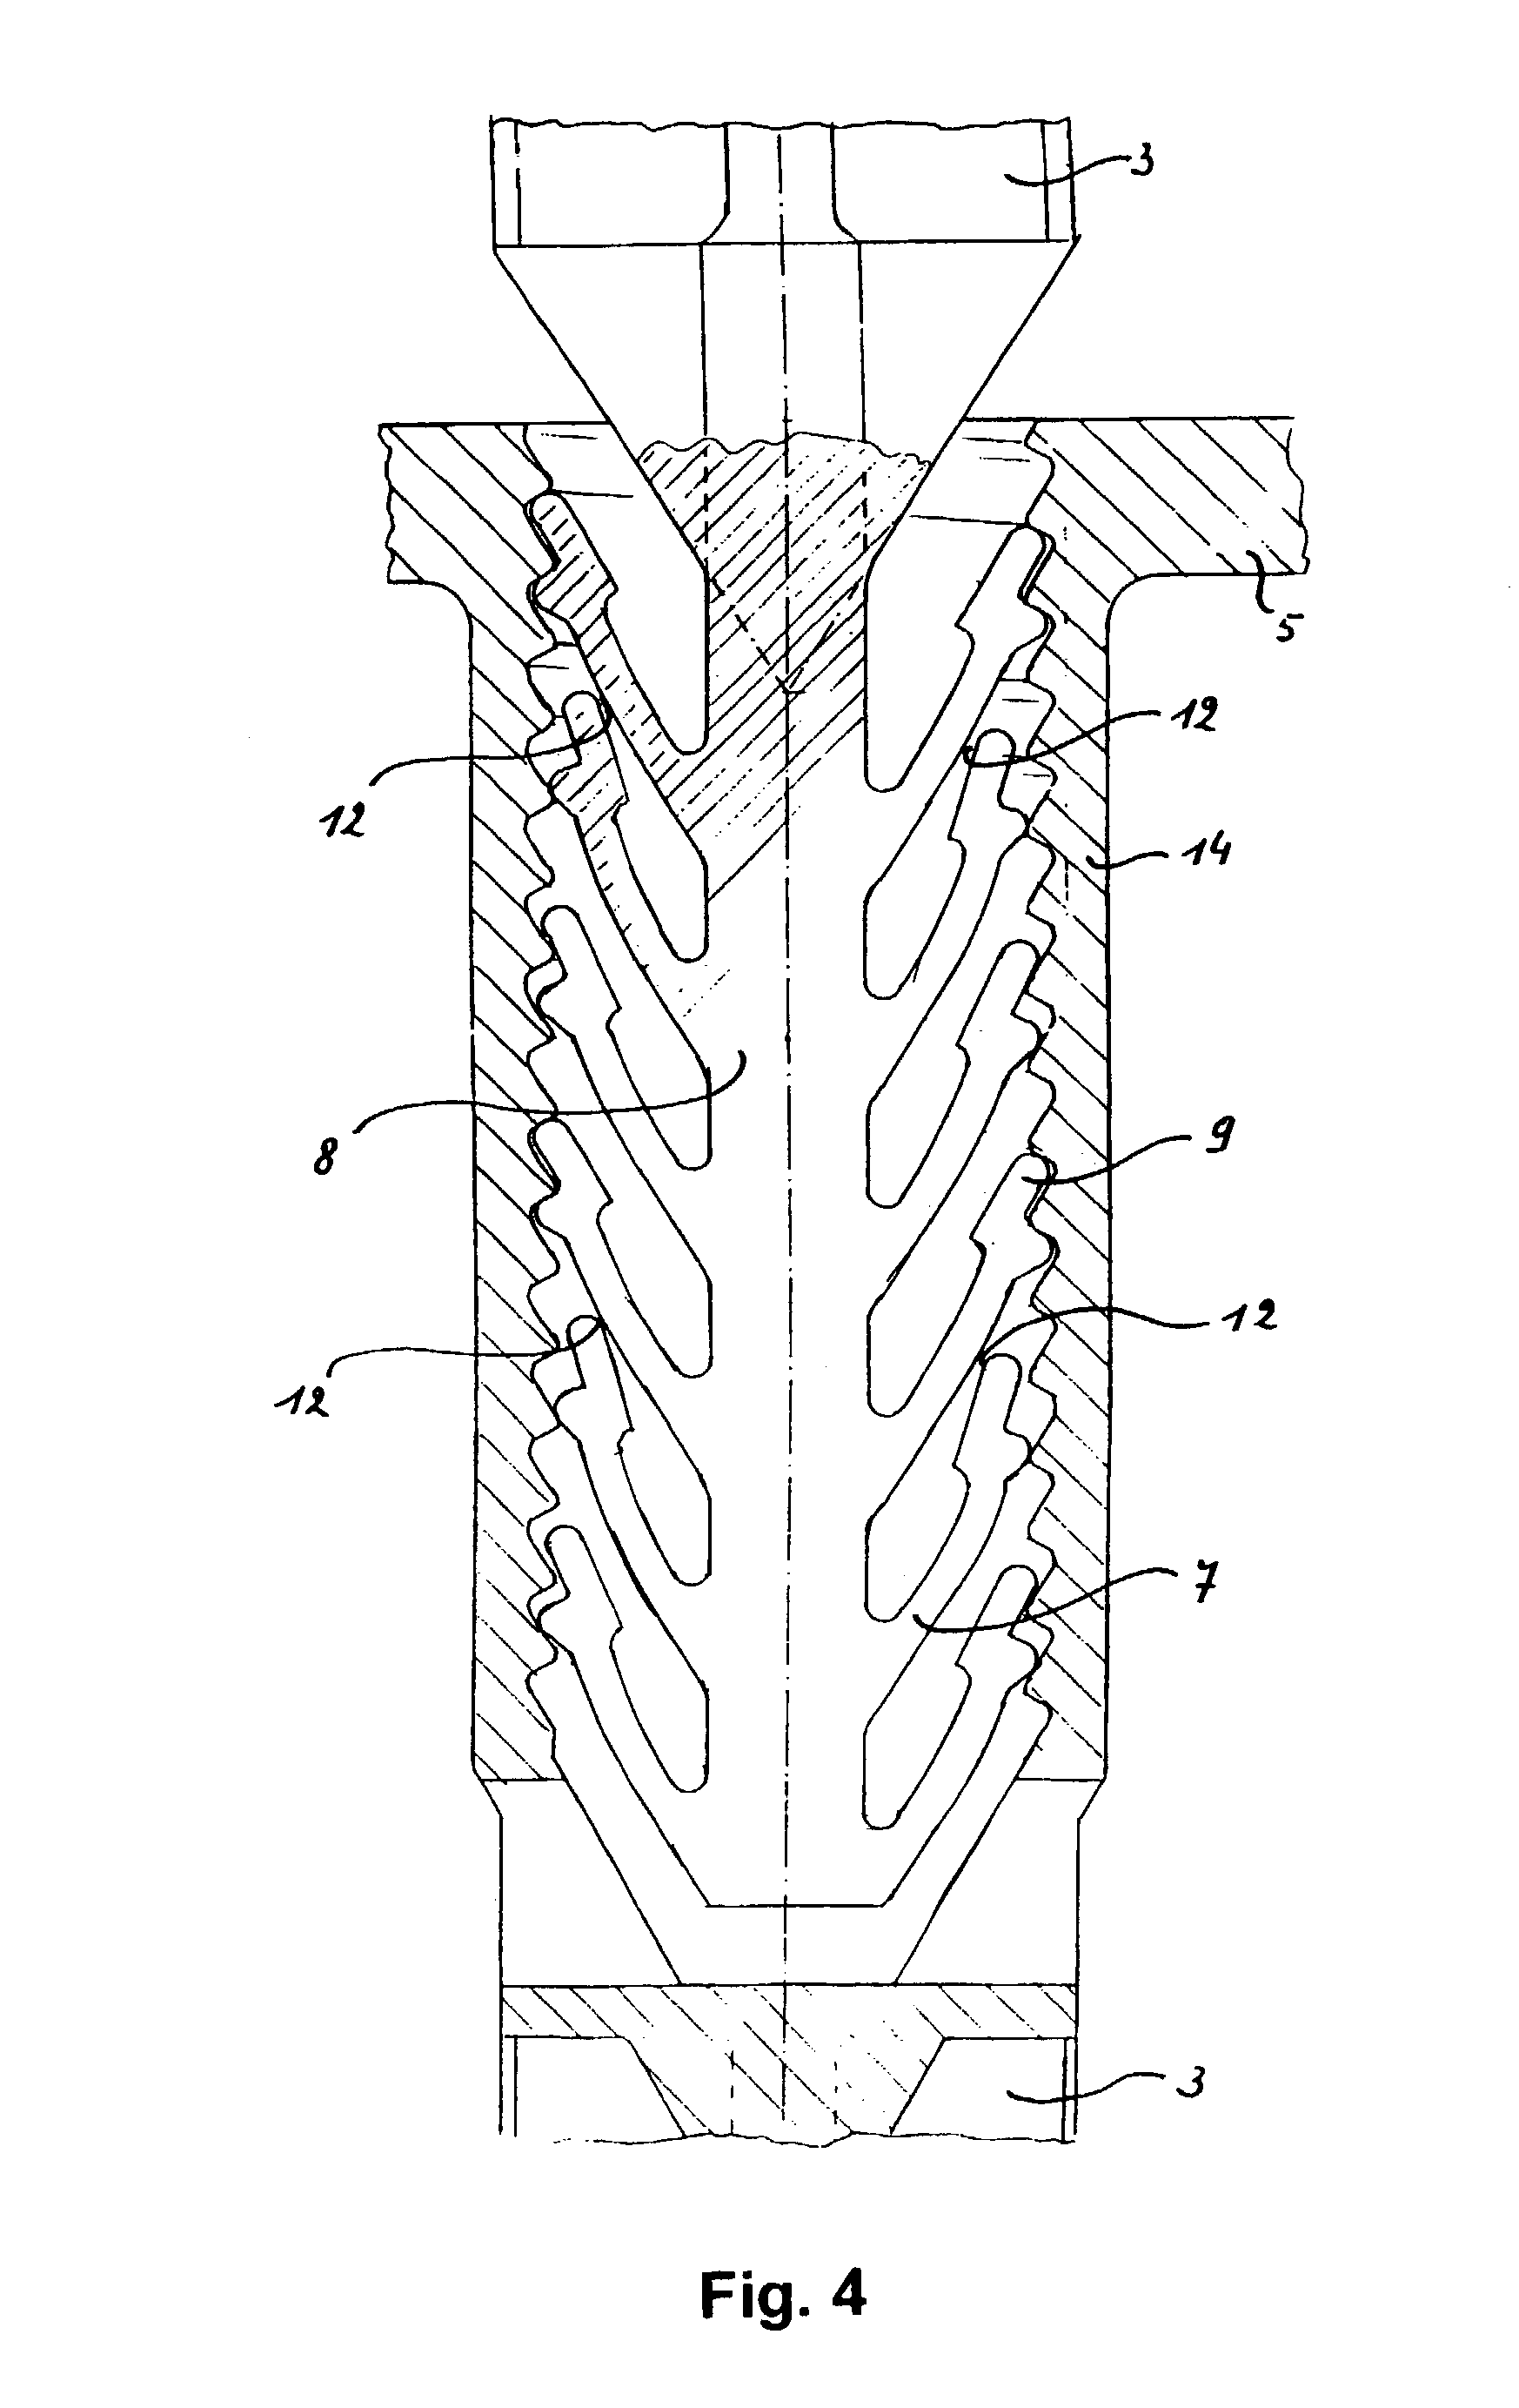 System for connecting elements